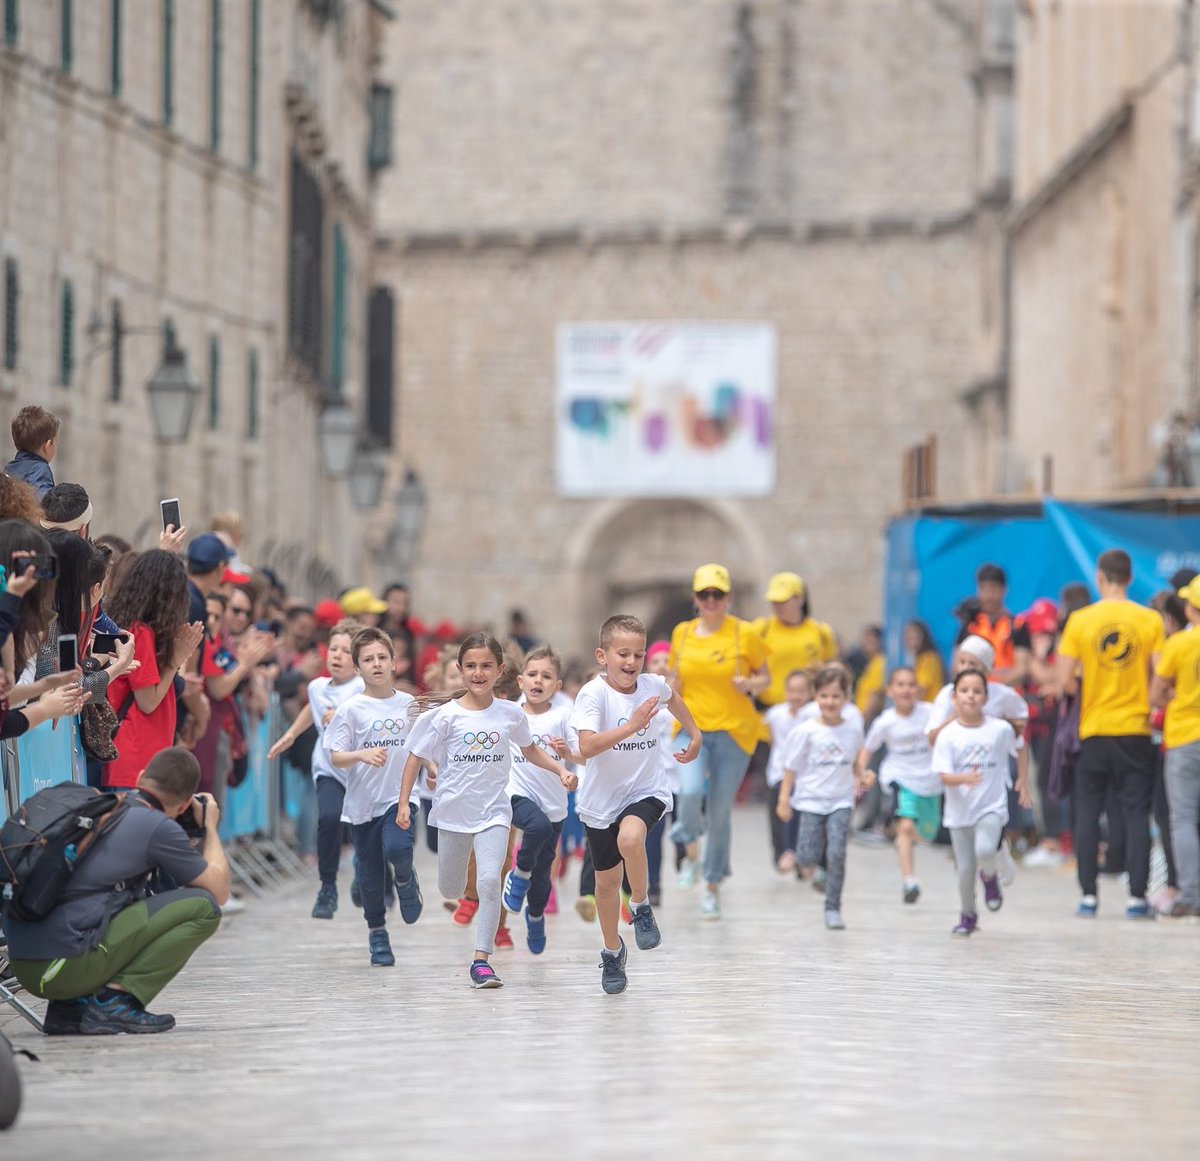 We can't wait to hear their laughter on Stradun again! 🙌🏃🏃‍♀️#dubrovnik #kidsday #kidsrace